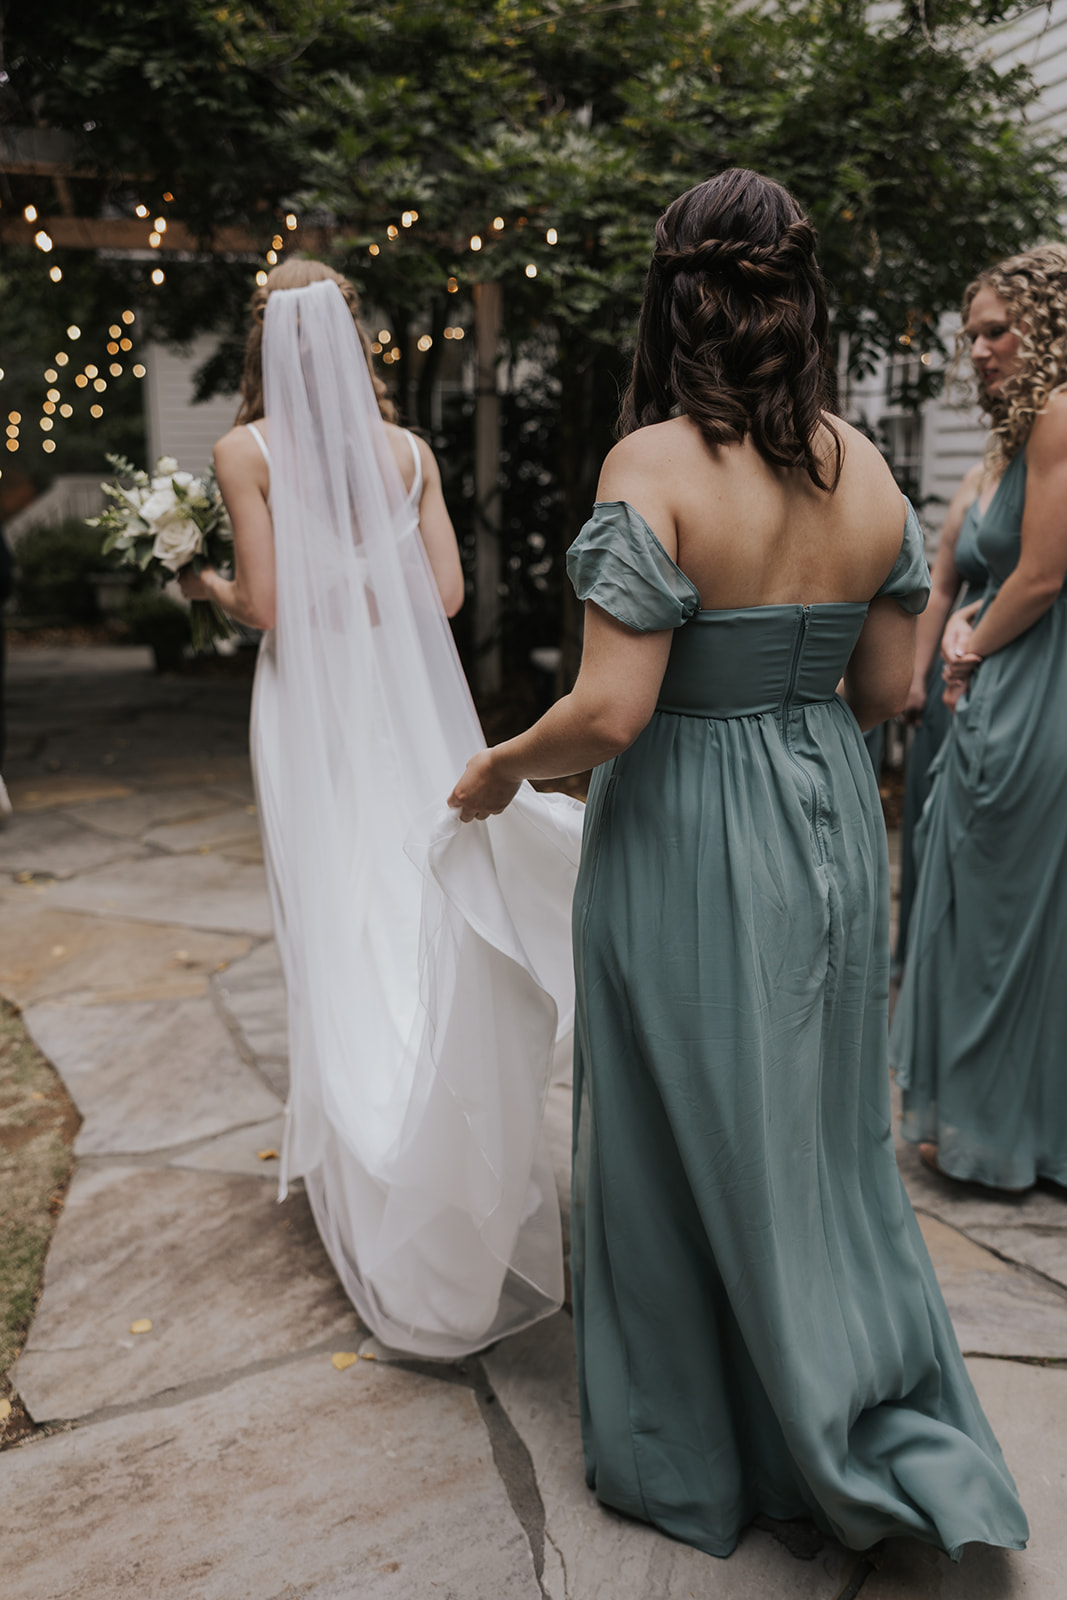 Bridesmaid carries the hem of the brides dress as they walk towards the ceremony